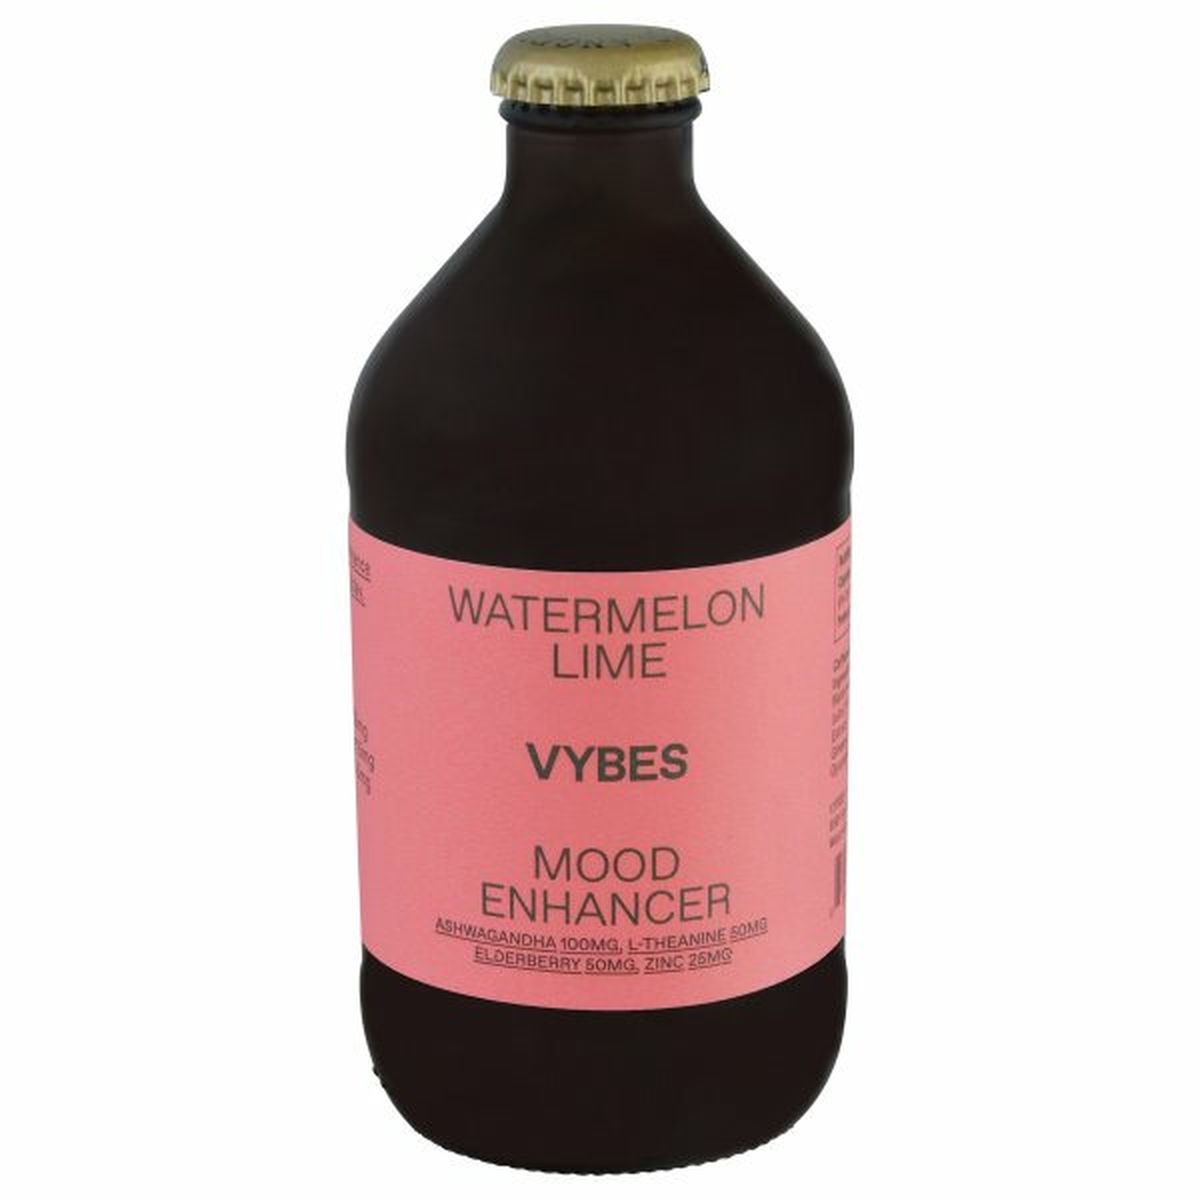 Calories in Vybes Mood Enhancer, Watermelon Lime